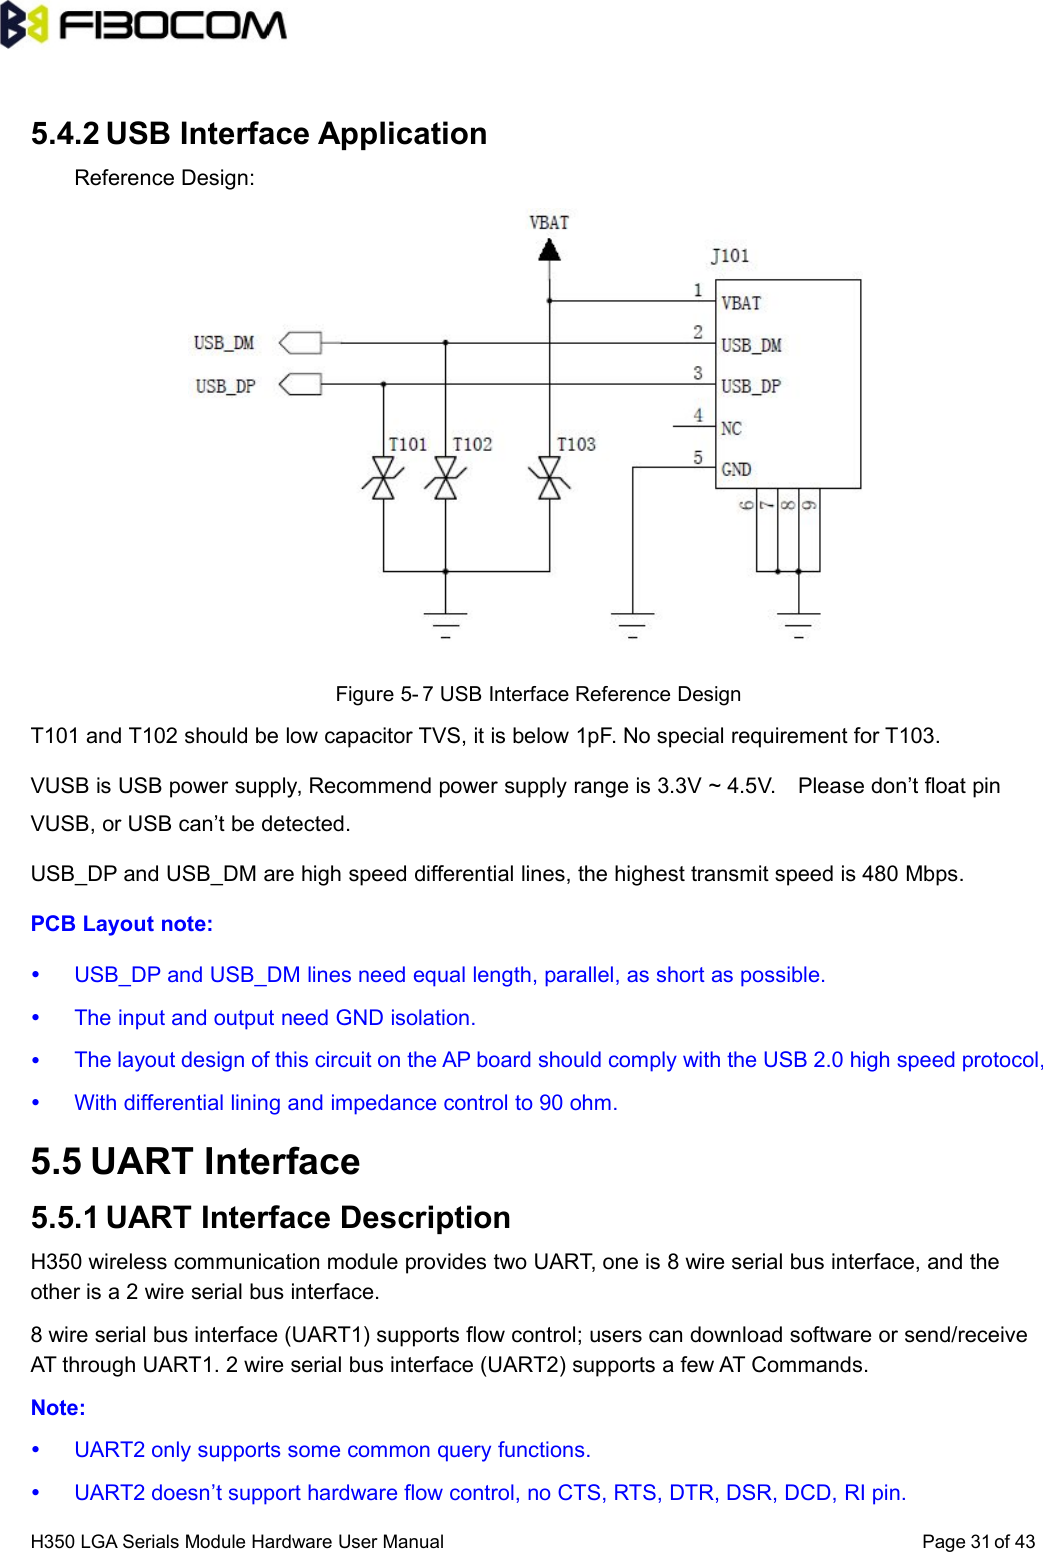 H350 LGA Serials Module Hardware User Manual Page of 43315.4.2 USB Interface ApplicationReference Design:Figure 5- 7 USB Interface Reference DesignT101 and T102 should be low capacitor TVS, it is below 1pF. No special requirement for T103.VUSB is USB power supply, Recommend power supply range is 3.3V ~ 4.5V. Please don’t float pinVUSB, or USB can’t be detected.USB_DP and USB_DM are high speed differential lines, the highest transmit speed is 480 Mbps.PCB Layout note:USB_DP and USB_DM lines need equal length, parallel, as short as possible.The input and output need GND isolation.The layout design of this circuit on the AP board should comply with the USB 2.0 high speed protocol,With differential lining and impedance control to 90 ohm.5.5 UART Interface5.5.1 UART Interface DescriptionH350 wireless communication module provides two UART, one is 8 wire serial bus interface, and theother is a 2 wire serial bus interface.8 wire serial bus interface (UART1) supports flow control; users can download software or send/receiveAT through UART1. 2 wire serial bus interface (UART2) supports a few AT Commands.Note:UART2 only supports some common query functions.UART2 doesn’t support hardware flow control, no CTS, RTS, DTR, DSR, DCD, RI pin.